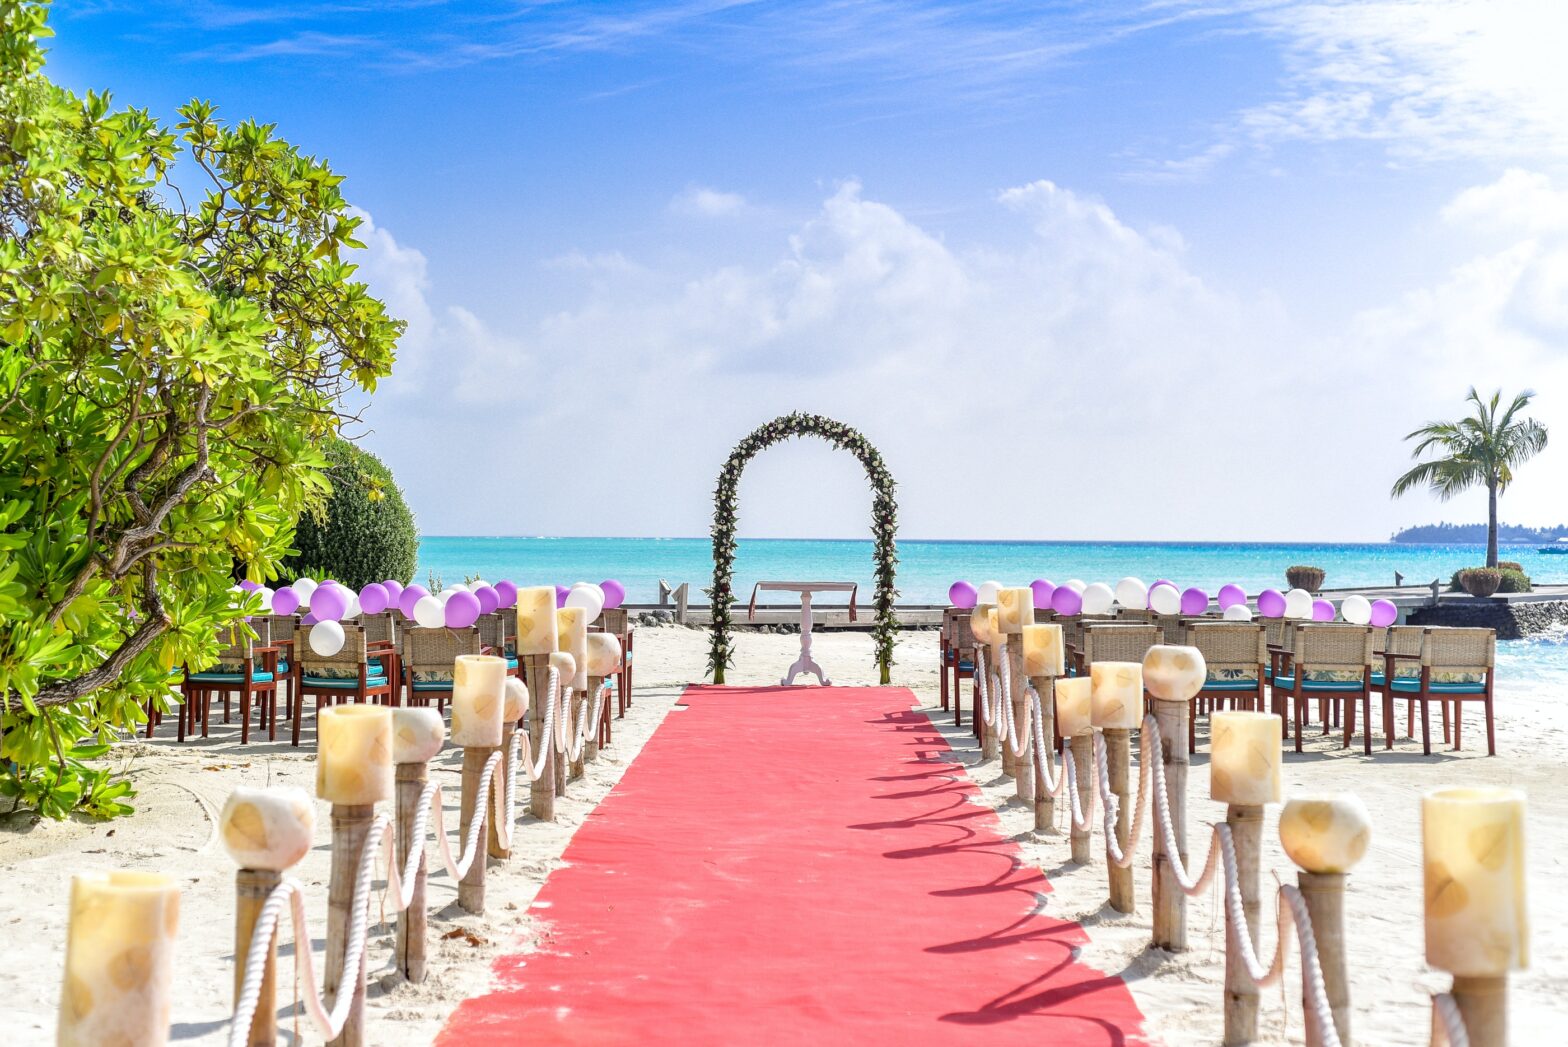 A wedding ceremony venue overlooking the beach. Here are some of the best places around the world to elope.